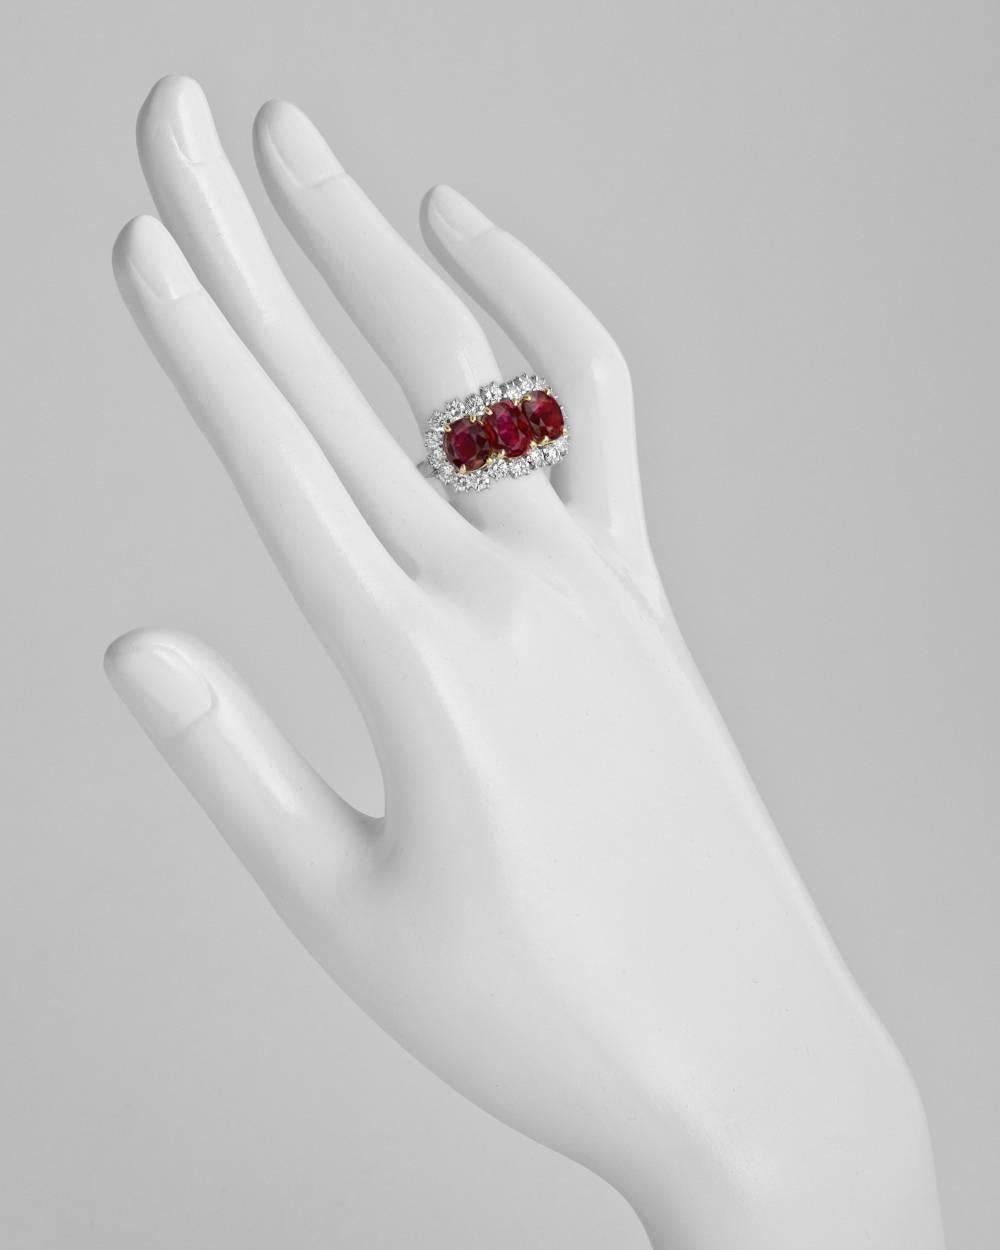 Cocktail ring, centering three oval-shaped rubies weighing approximately 4.65 total carats (1.69, 1.57, and 1.39 carats, respectively), framed by round-cut diamonds weighing approximately 2.00 total carats (VS1-VS2 clarity), mounted in platinum with